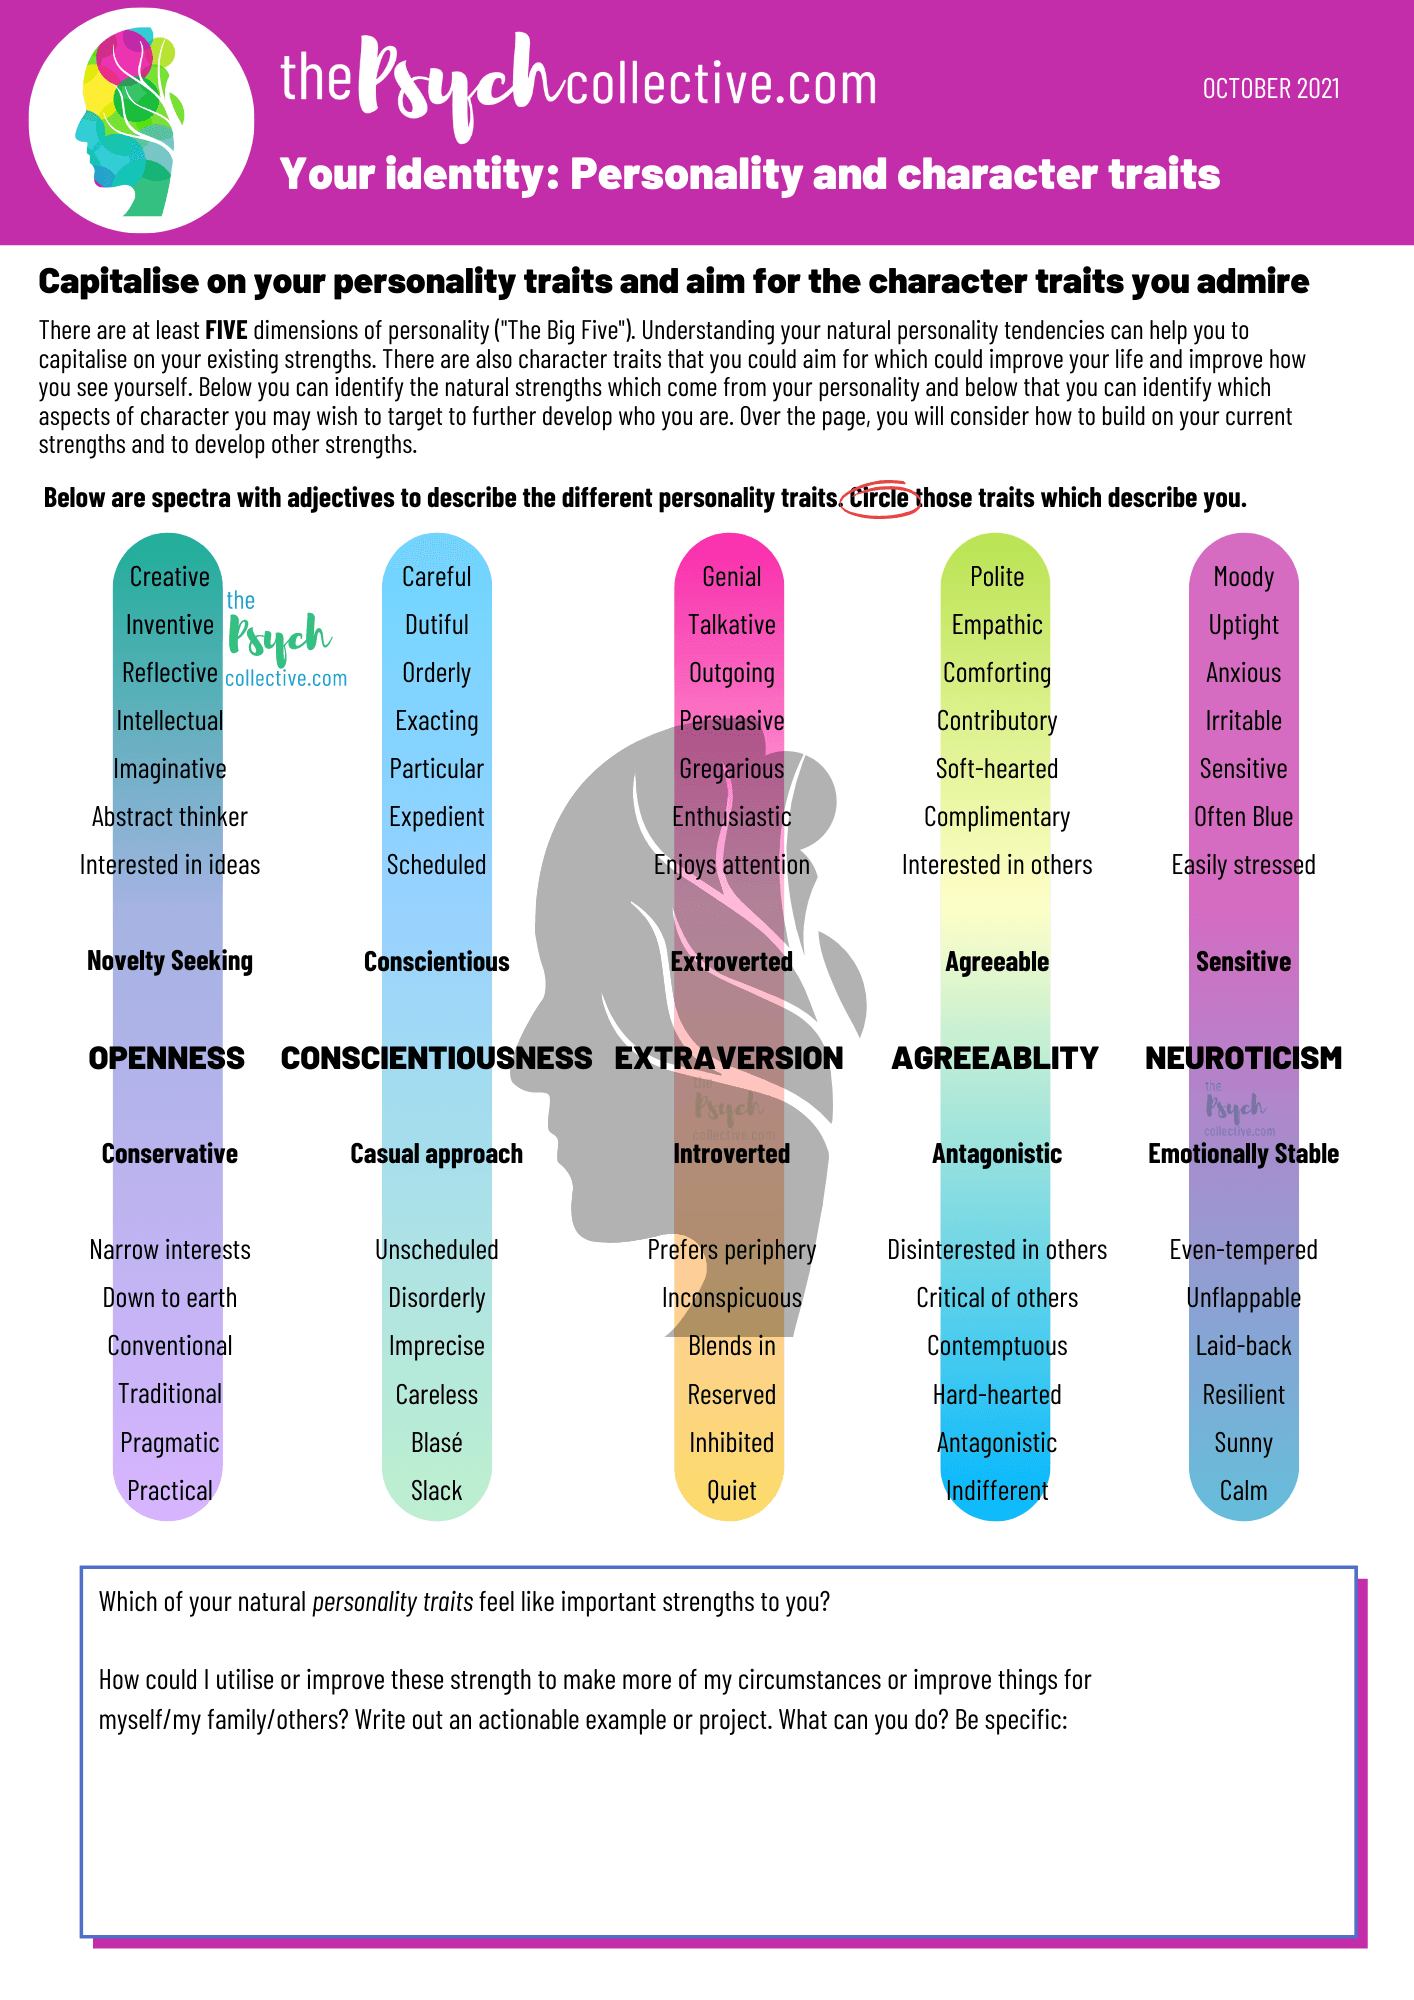 Personality & Character Traits handout from The Psych Collective